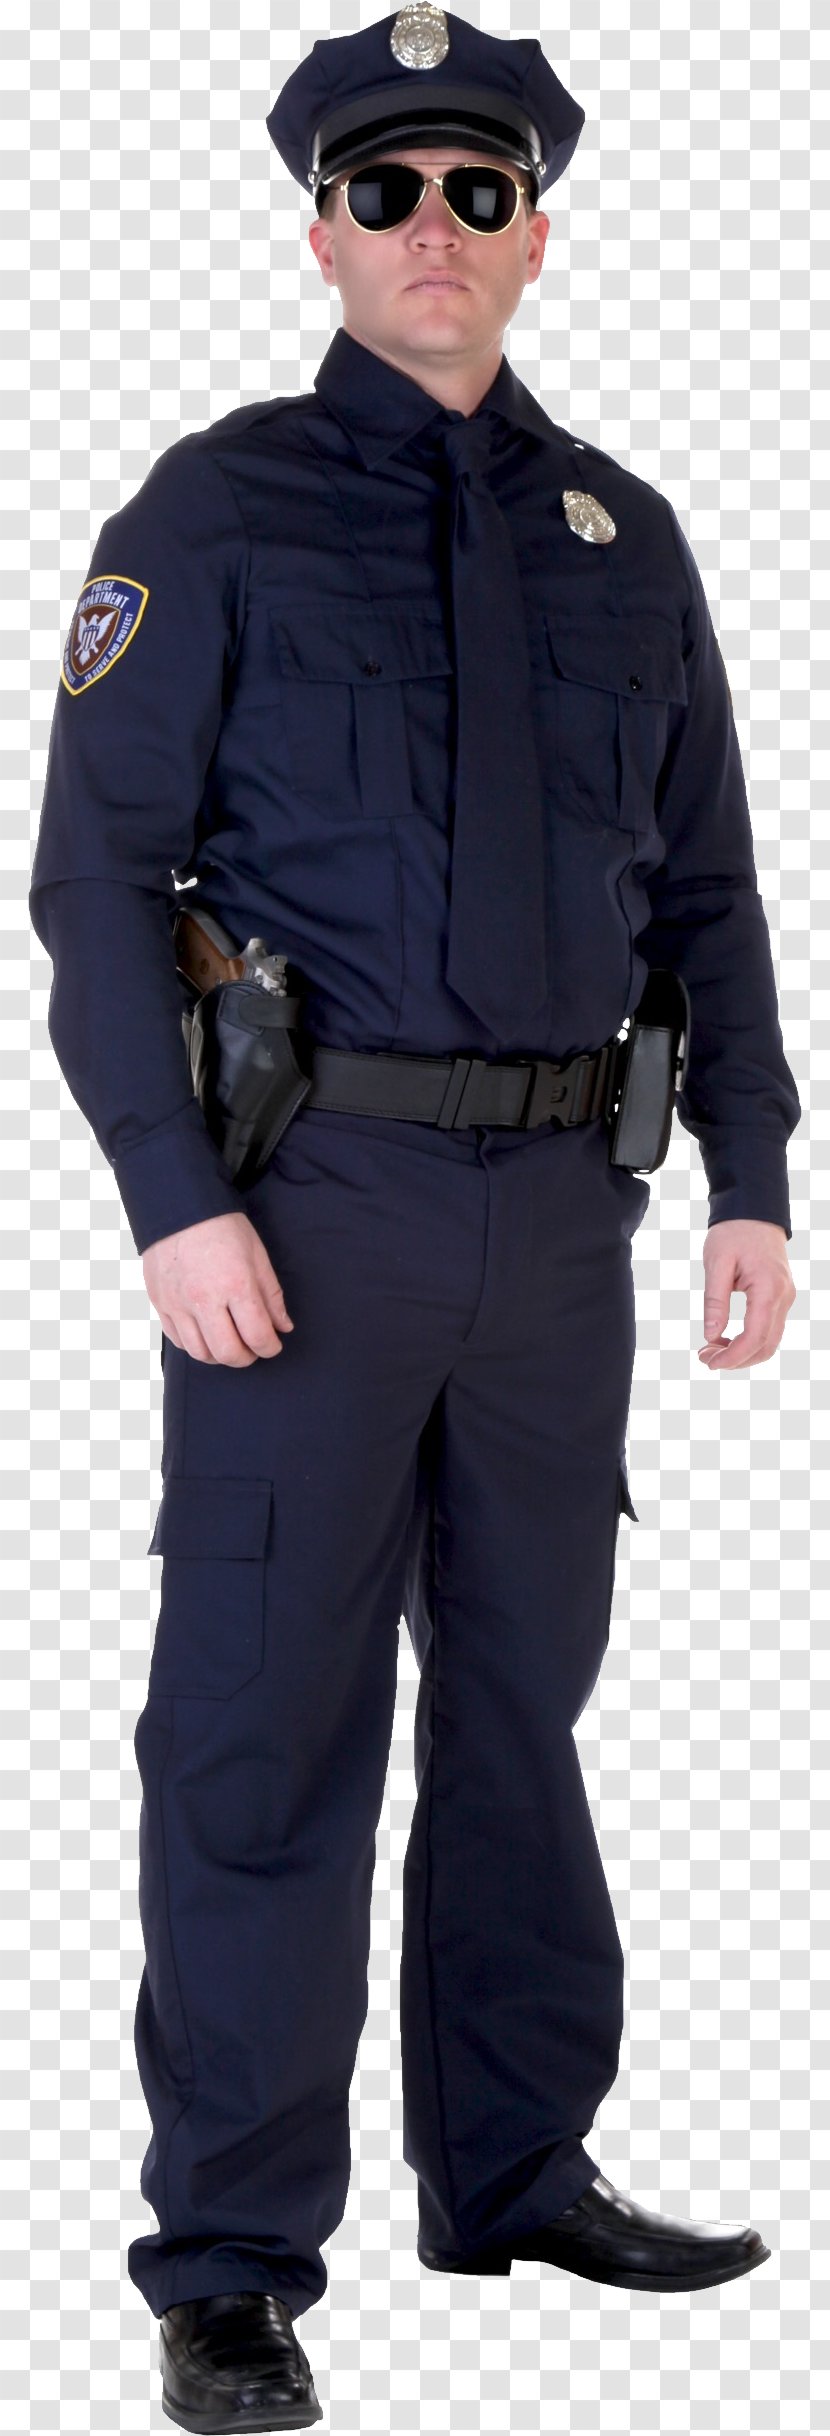 Couple Costume Police Officer Halloween - Policeman Transparent PNG